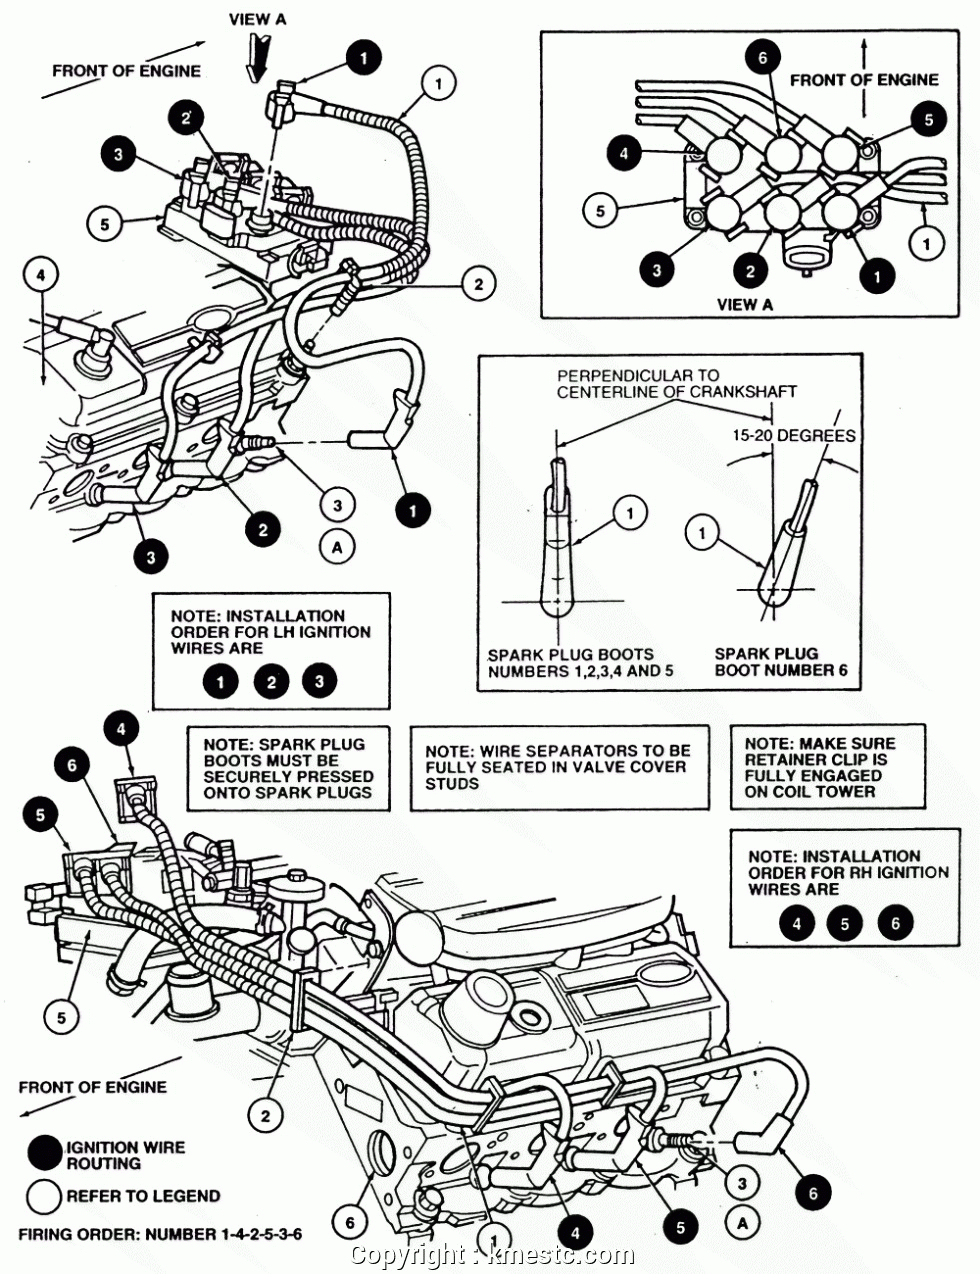 Ford Mustang Spark Plug Wiring Diagram - Electric Bicycle